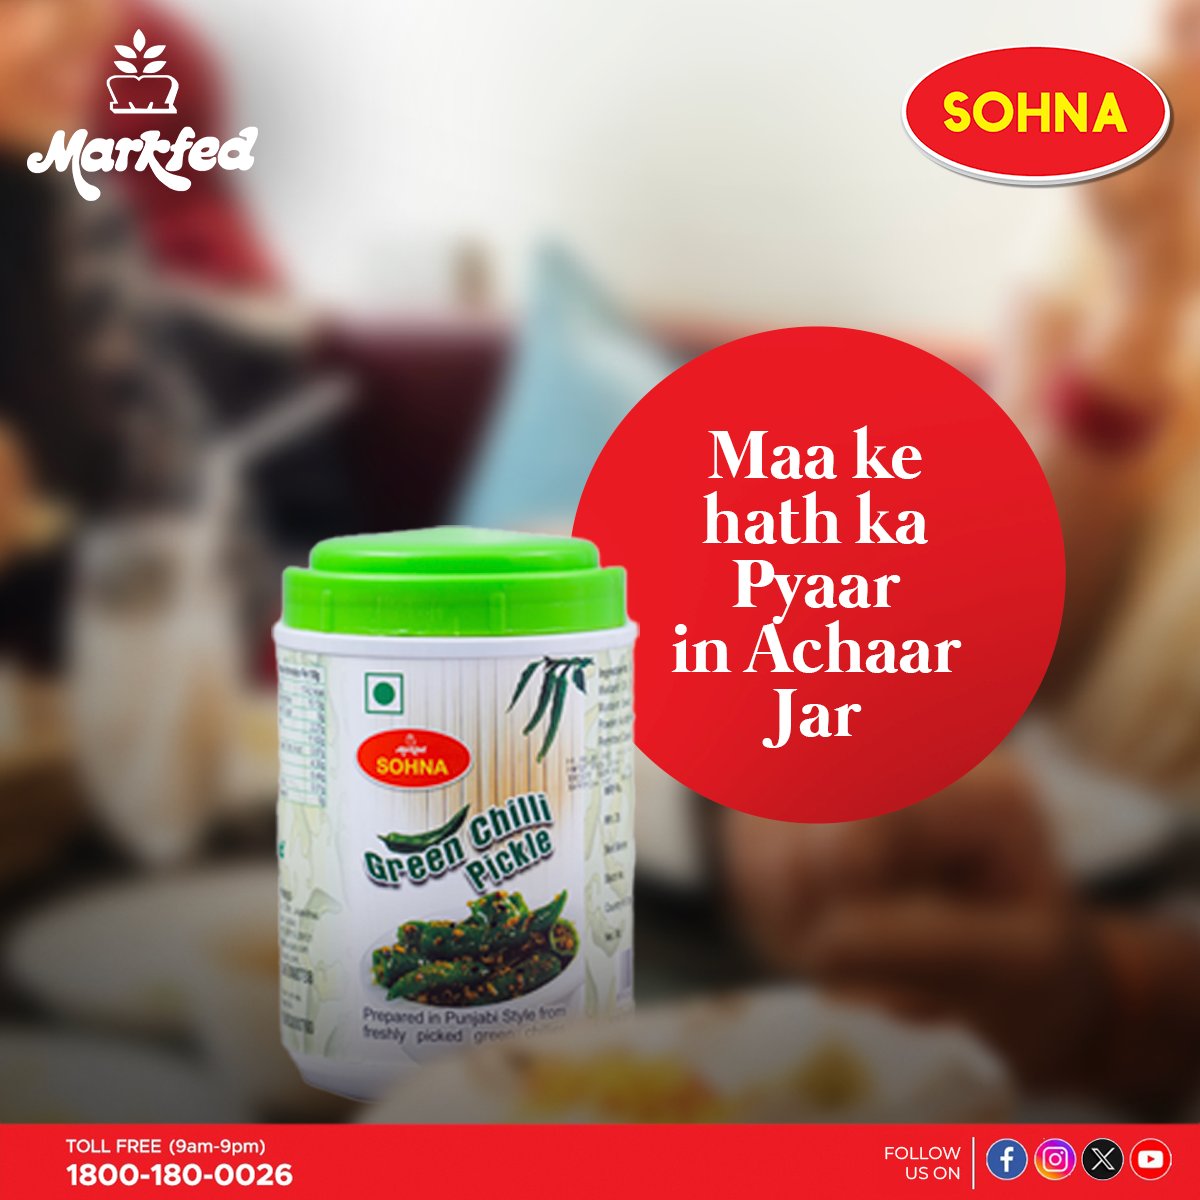 Unleash the Love, Unseal the Jar! SOHNA Chilli Pickle - A Taste of Home, Packed with Love. 🌶❤ To purchase Markfed SOHNA Products, please check the link given: bit.ly/3IOvqoo #SOHNA #SOHNAMarkfed #Punjab #SohnaLoveInAJar #pickles #mangopickle #chillipickle #TastyTreat